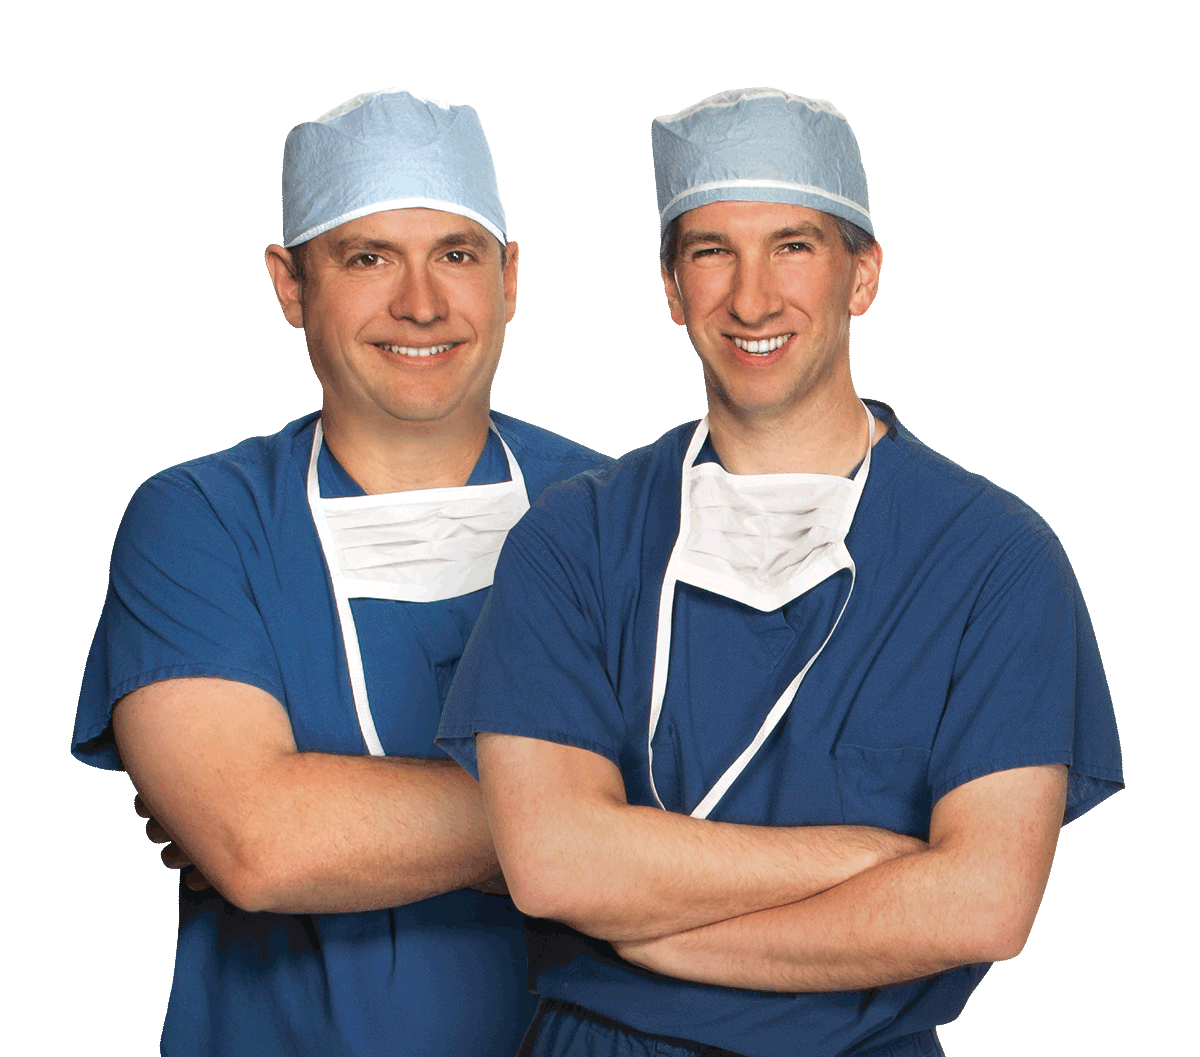 Dr. Adam Altman, MD and Dr. Jonathan Primack, MD are the LASIK experts at Eye Consultants of PA. They are ophthalmic surgeons who perform laser eye surgery, PRK surgery, cornea surgery and cataract surgery.